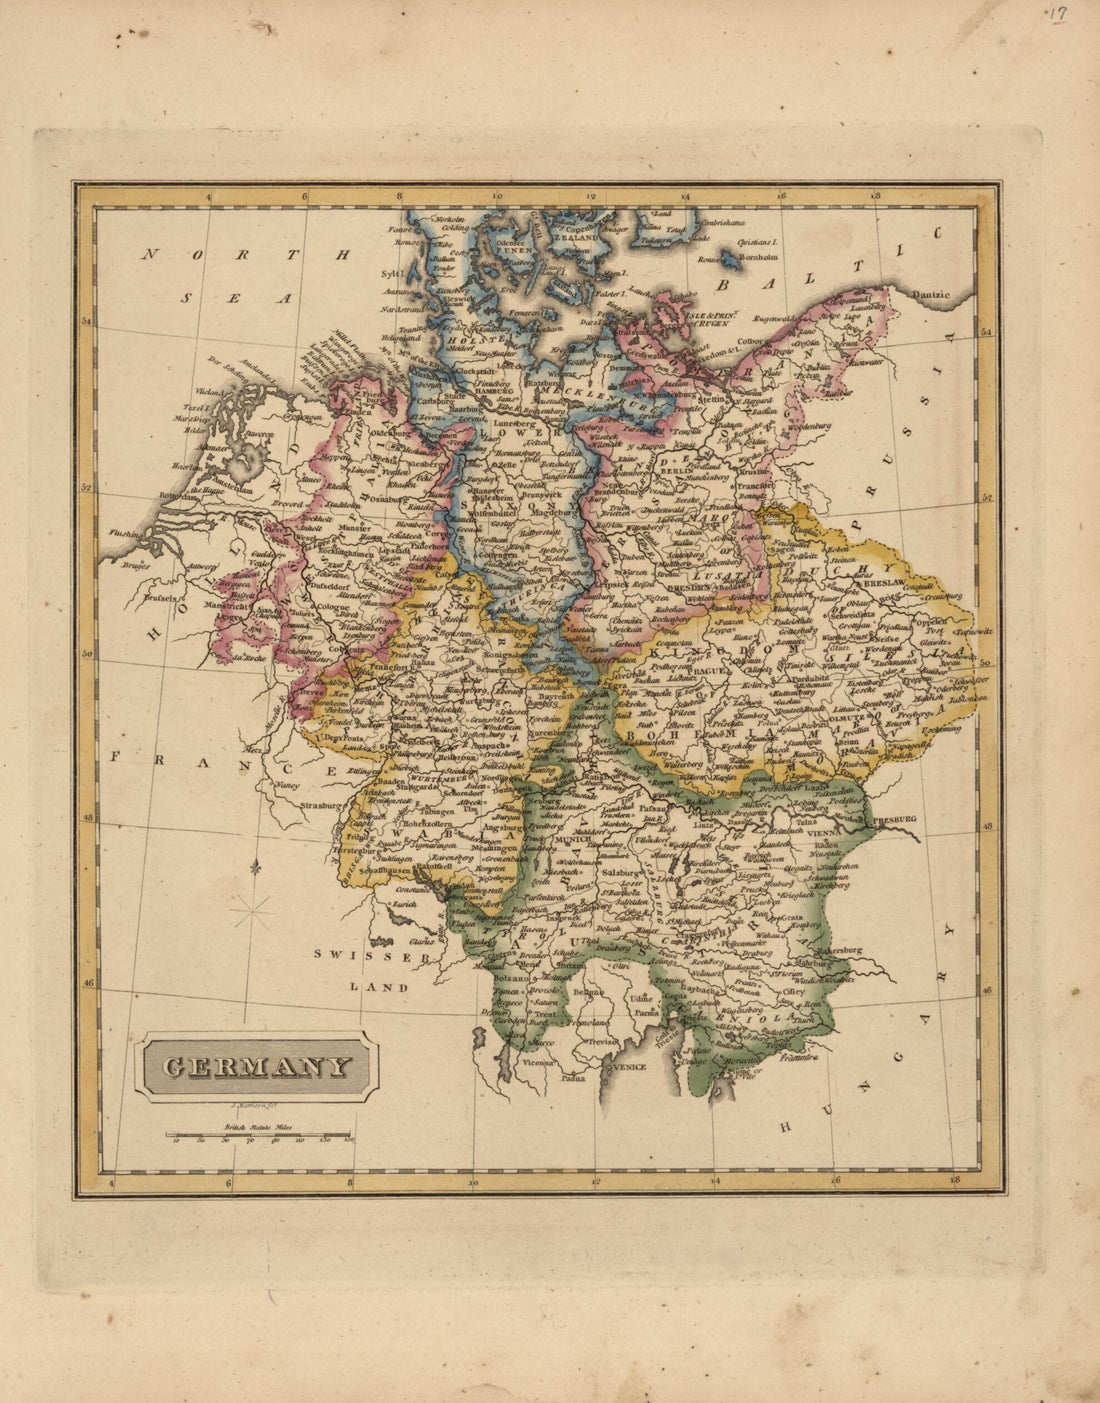 This old map of Germany from a New and Elegant General Atlas, Containing Maps of Each of the United States. from 1817 was created by Henry Schenck Tanner in 1817